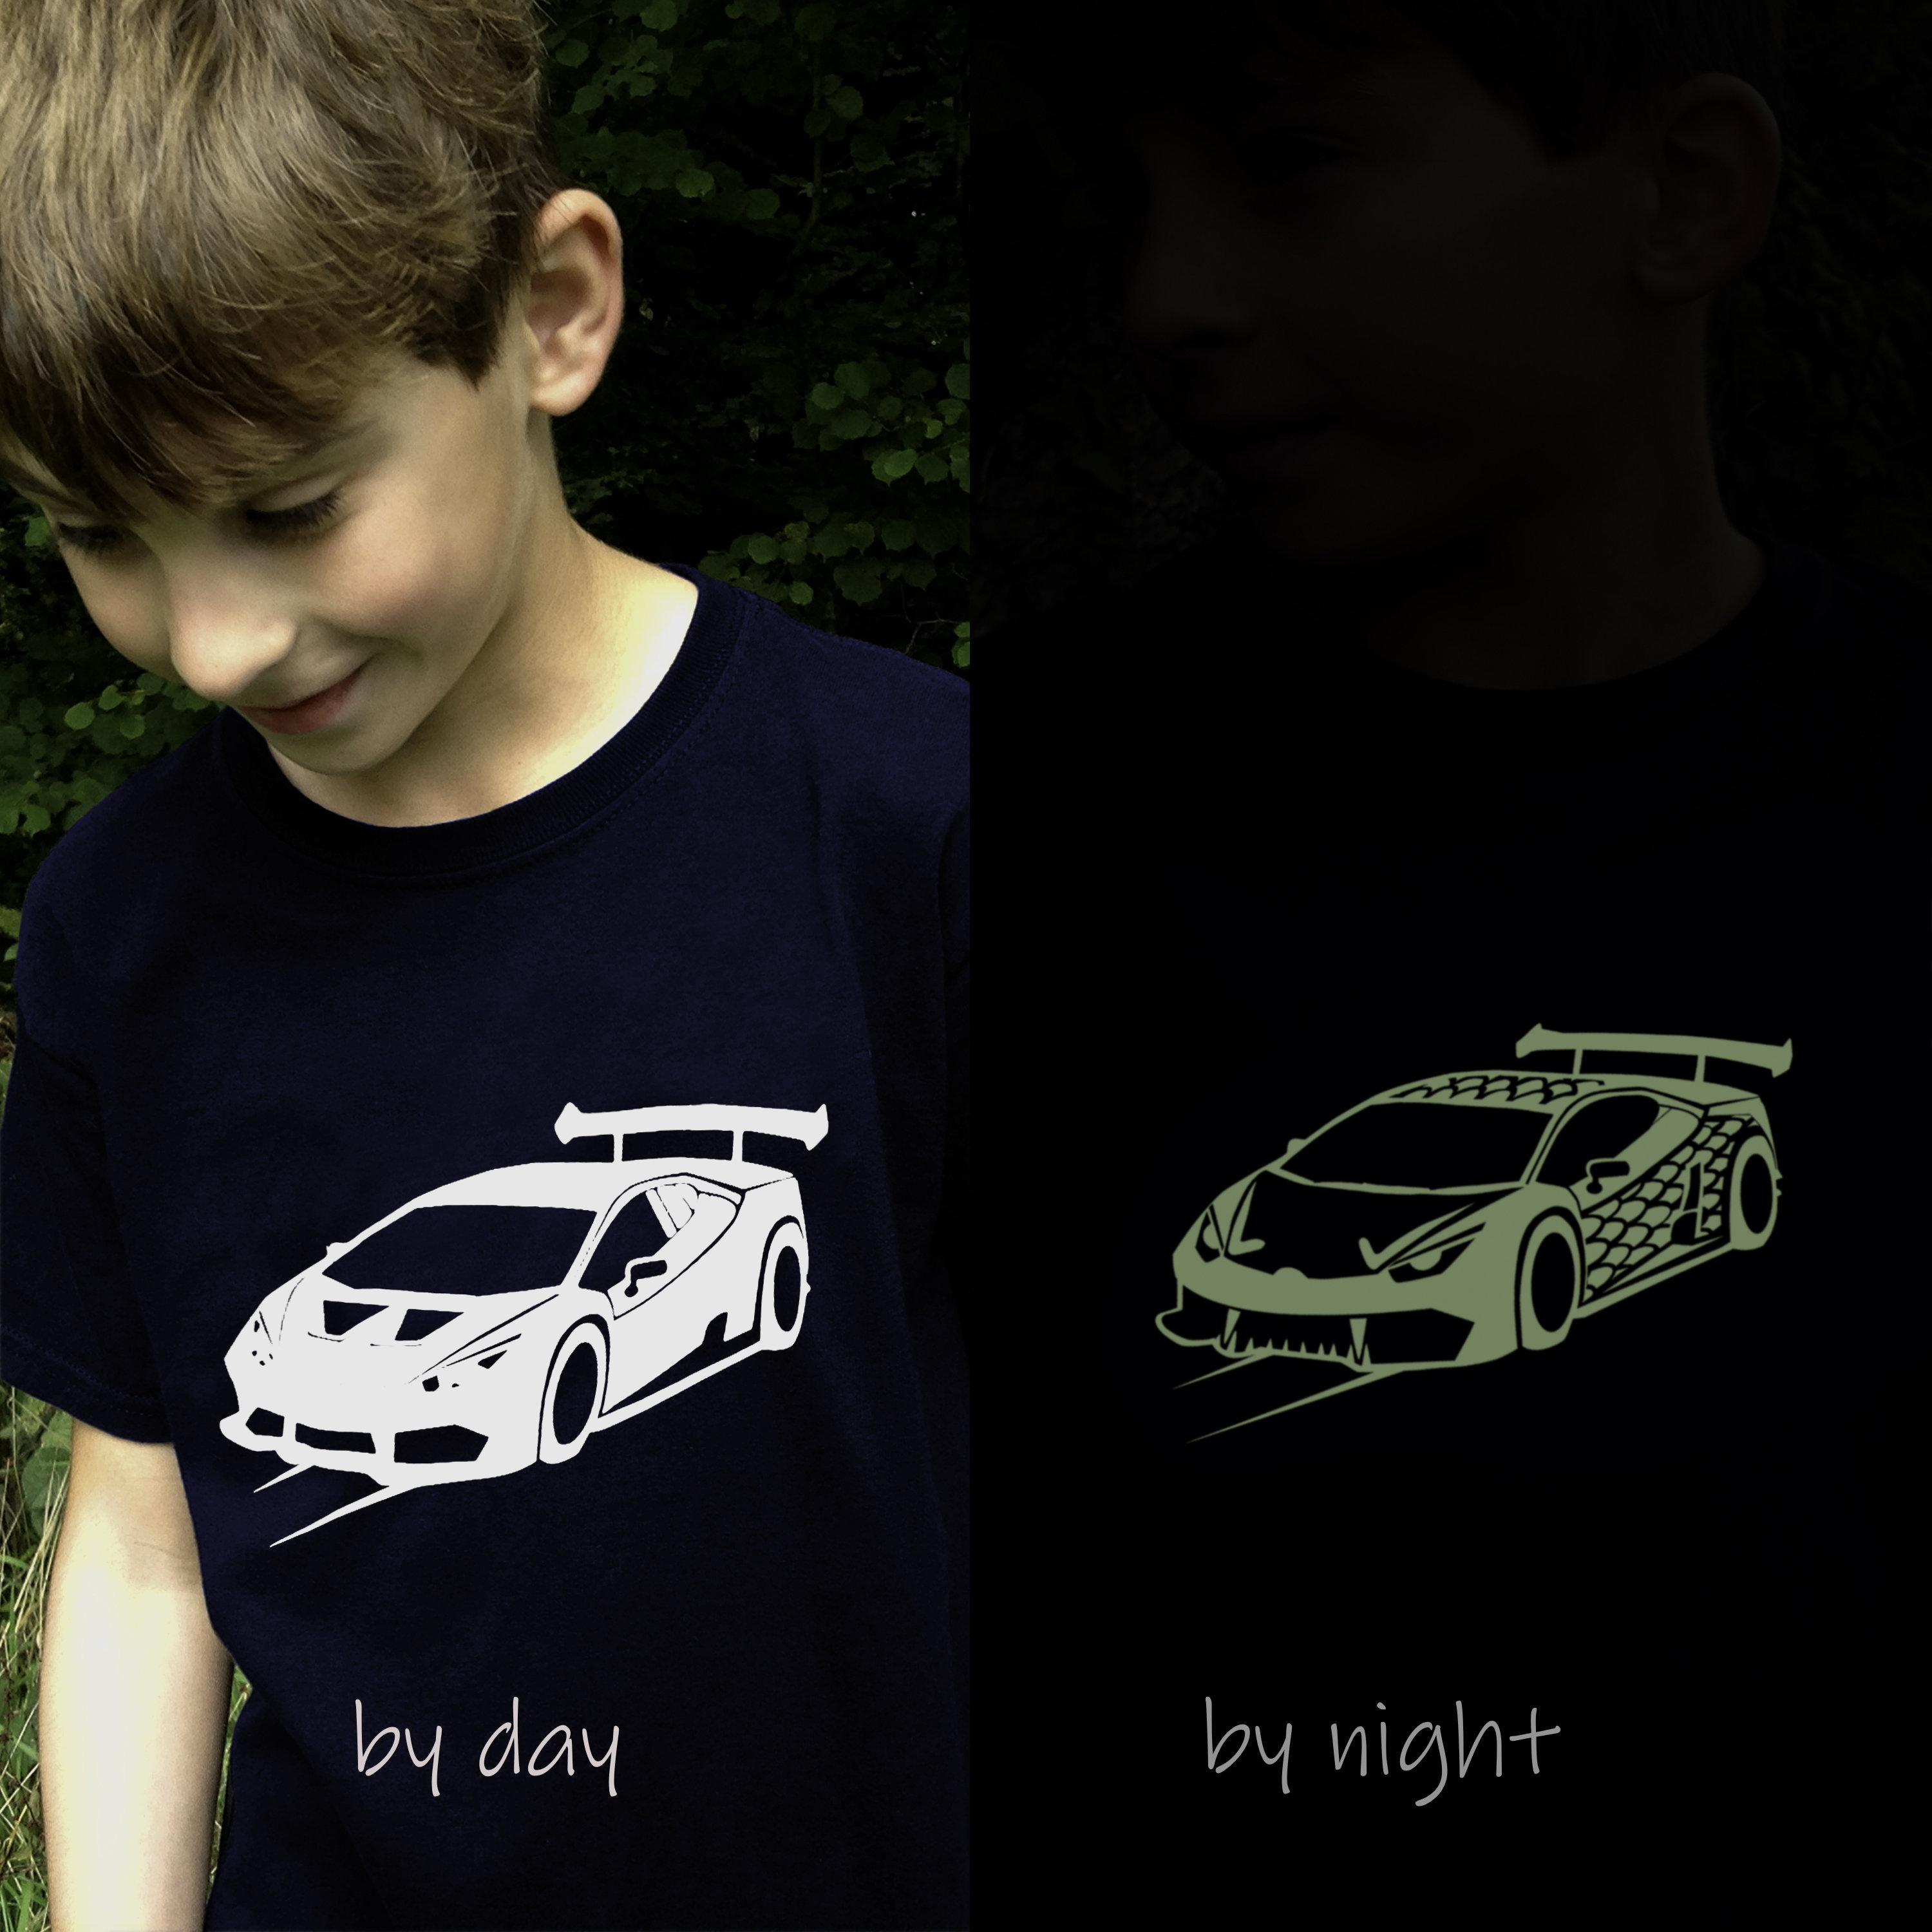 Sports Car T Shirt Kid Car Tops Kids Glow in the Dark Clothing Boys  Presents Fast Cars Handmade Car Tees Great Gifts for Boys Uk Transport -  Etsy